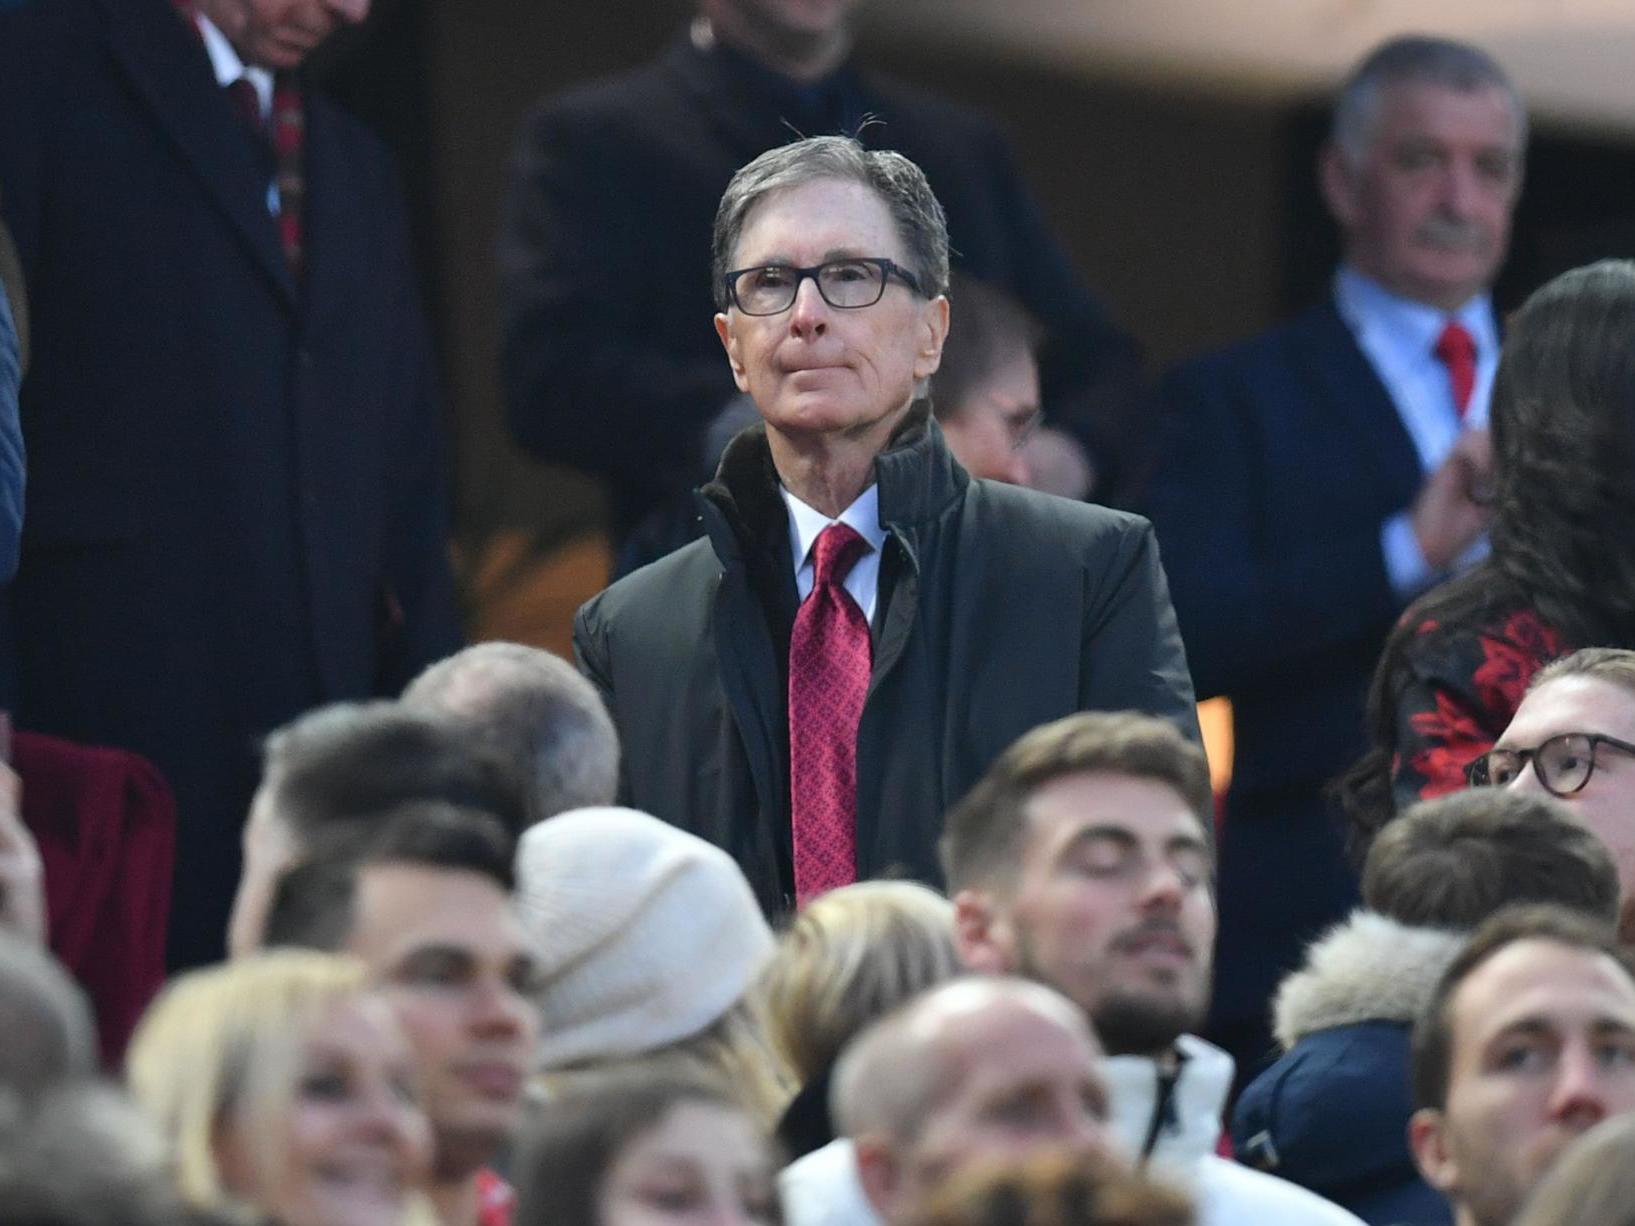 Liverpool's American owner is the billionaire businessman John W Henry